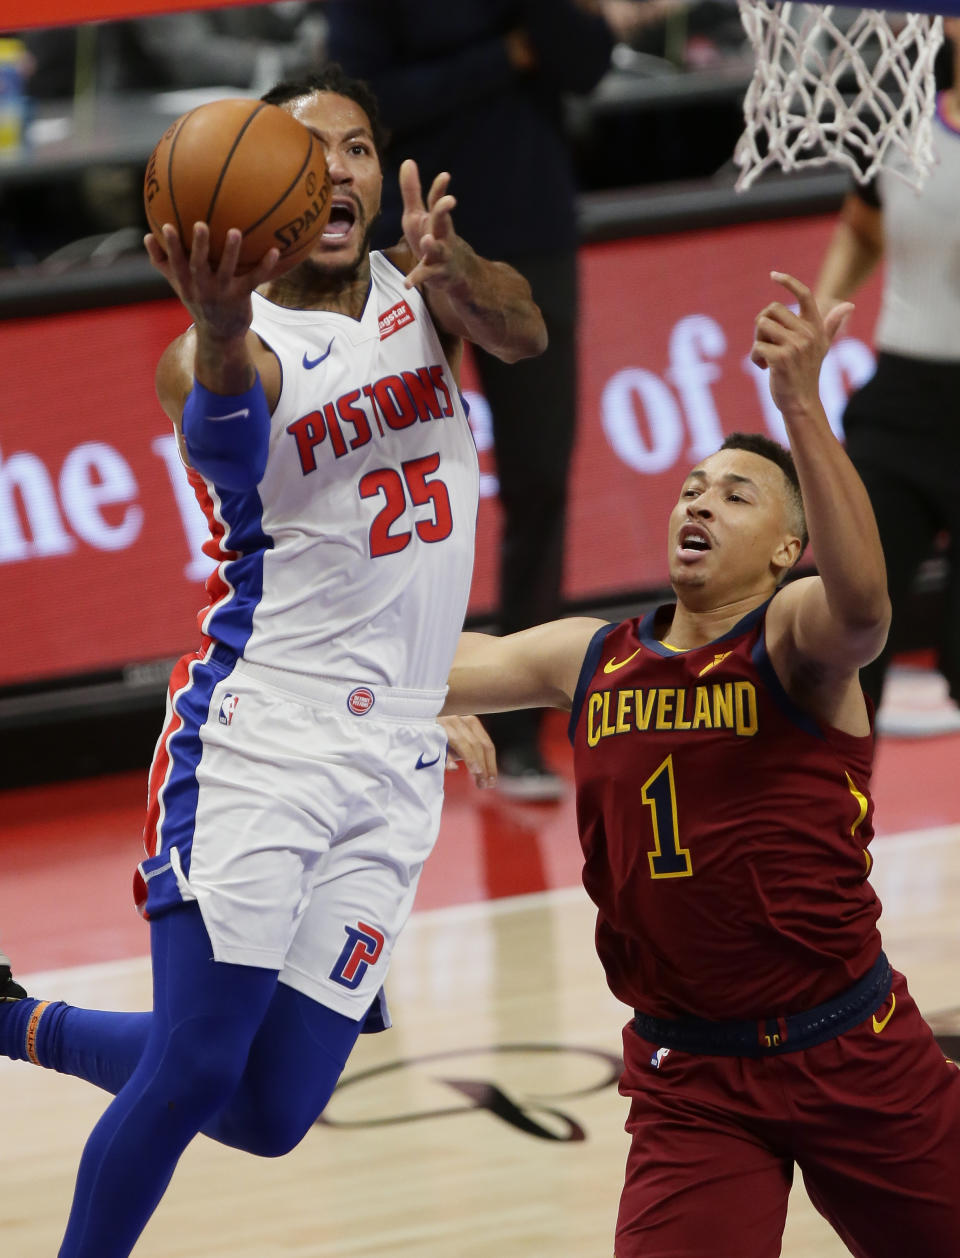 Detroit Pistons guard Derrick Rose, left, goes to the basket past Cleveland Cavaliers guard Dante Exum, right, during the first half of an NBA basketball game Saturday, Dec. 26, 2020, in Detroit. (AP Photo/Duane Burleson)